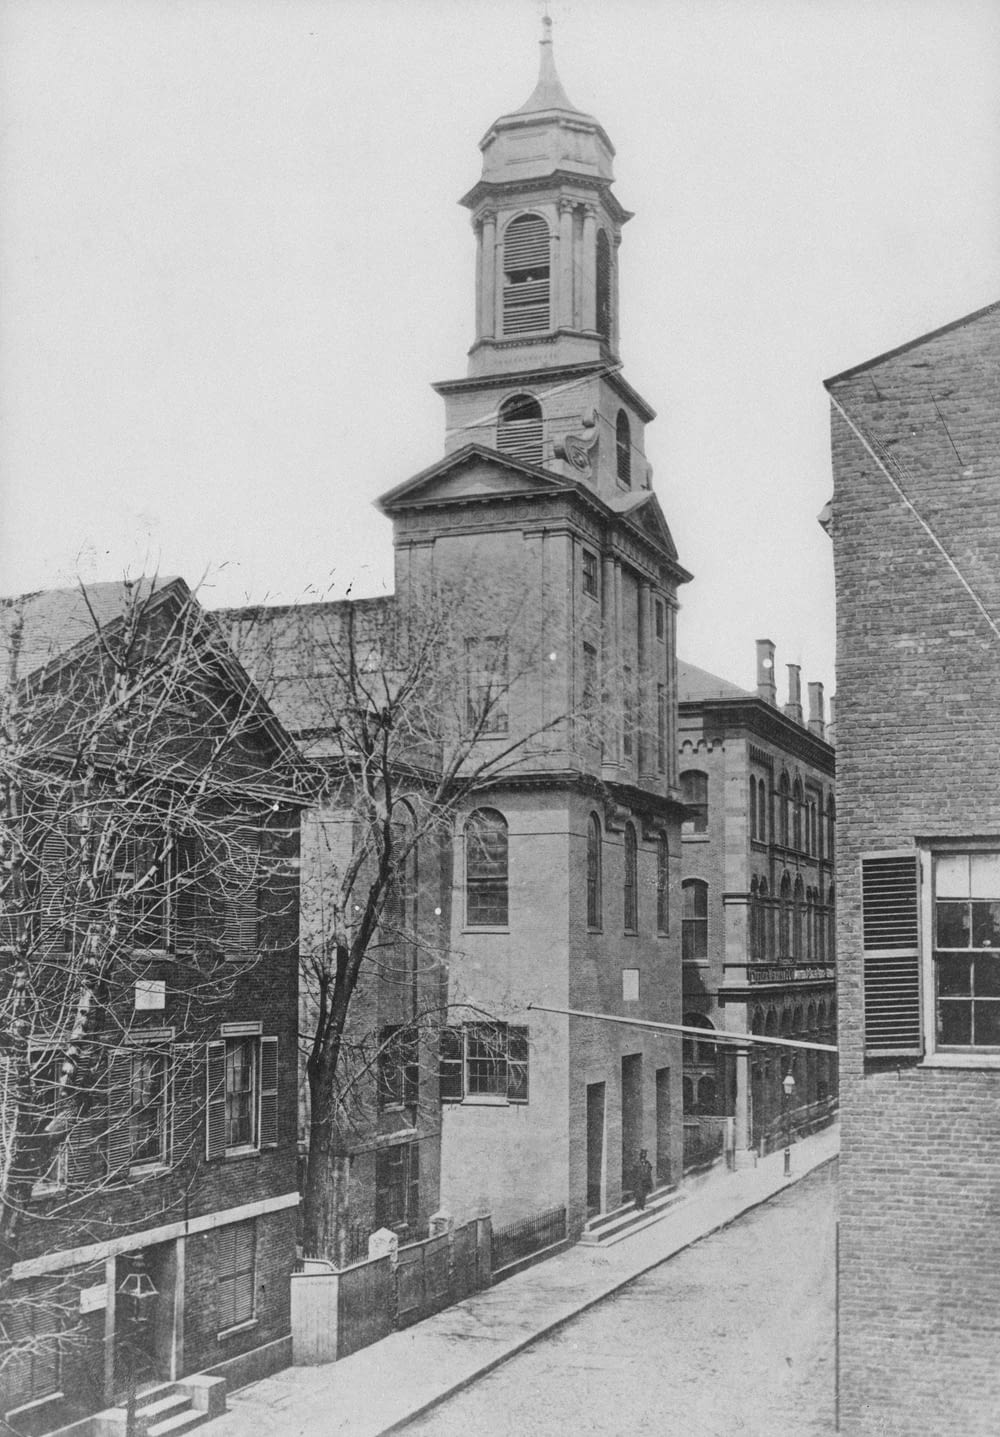 an old black and white photo of a building with a clock tower